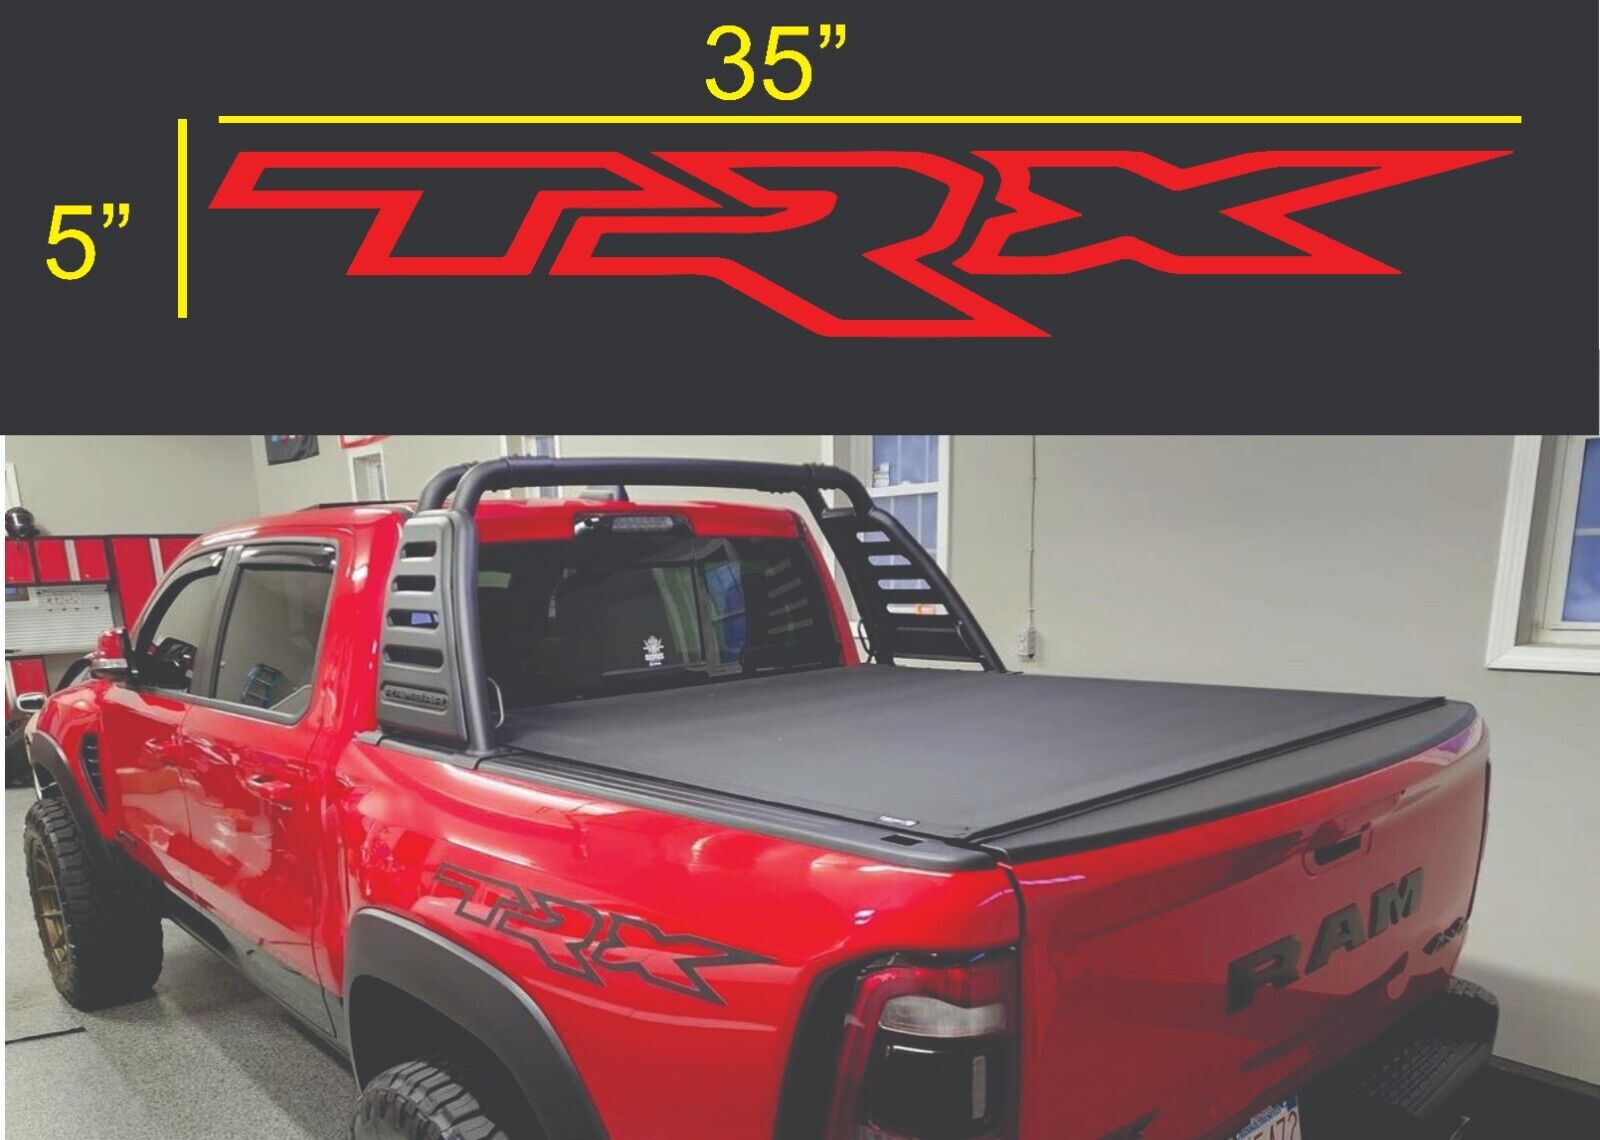 2 Piece TRX Solid Bed Decals Gloss Red or matte black